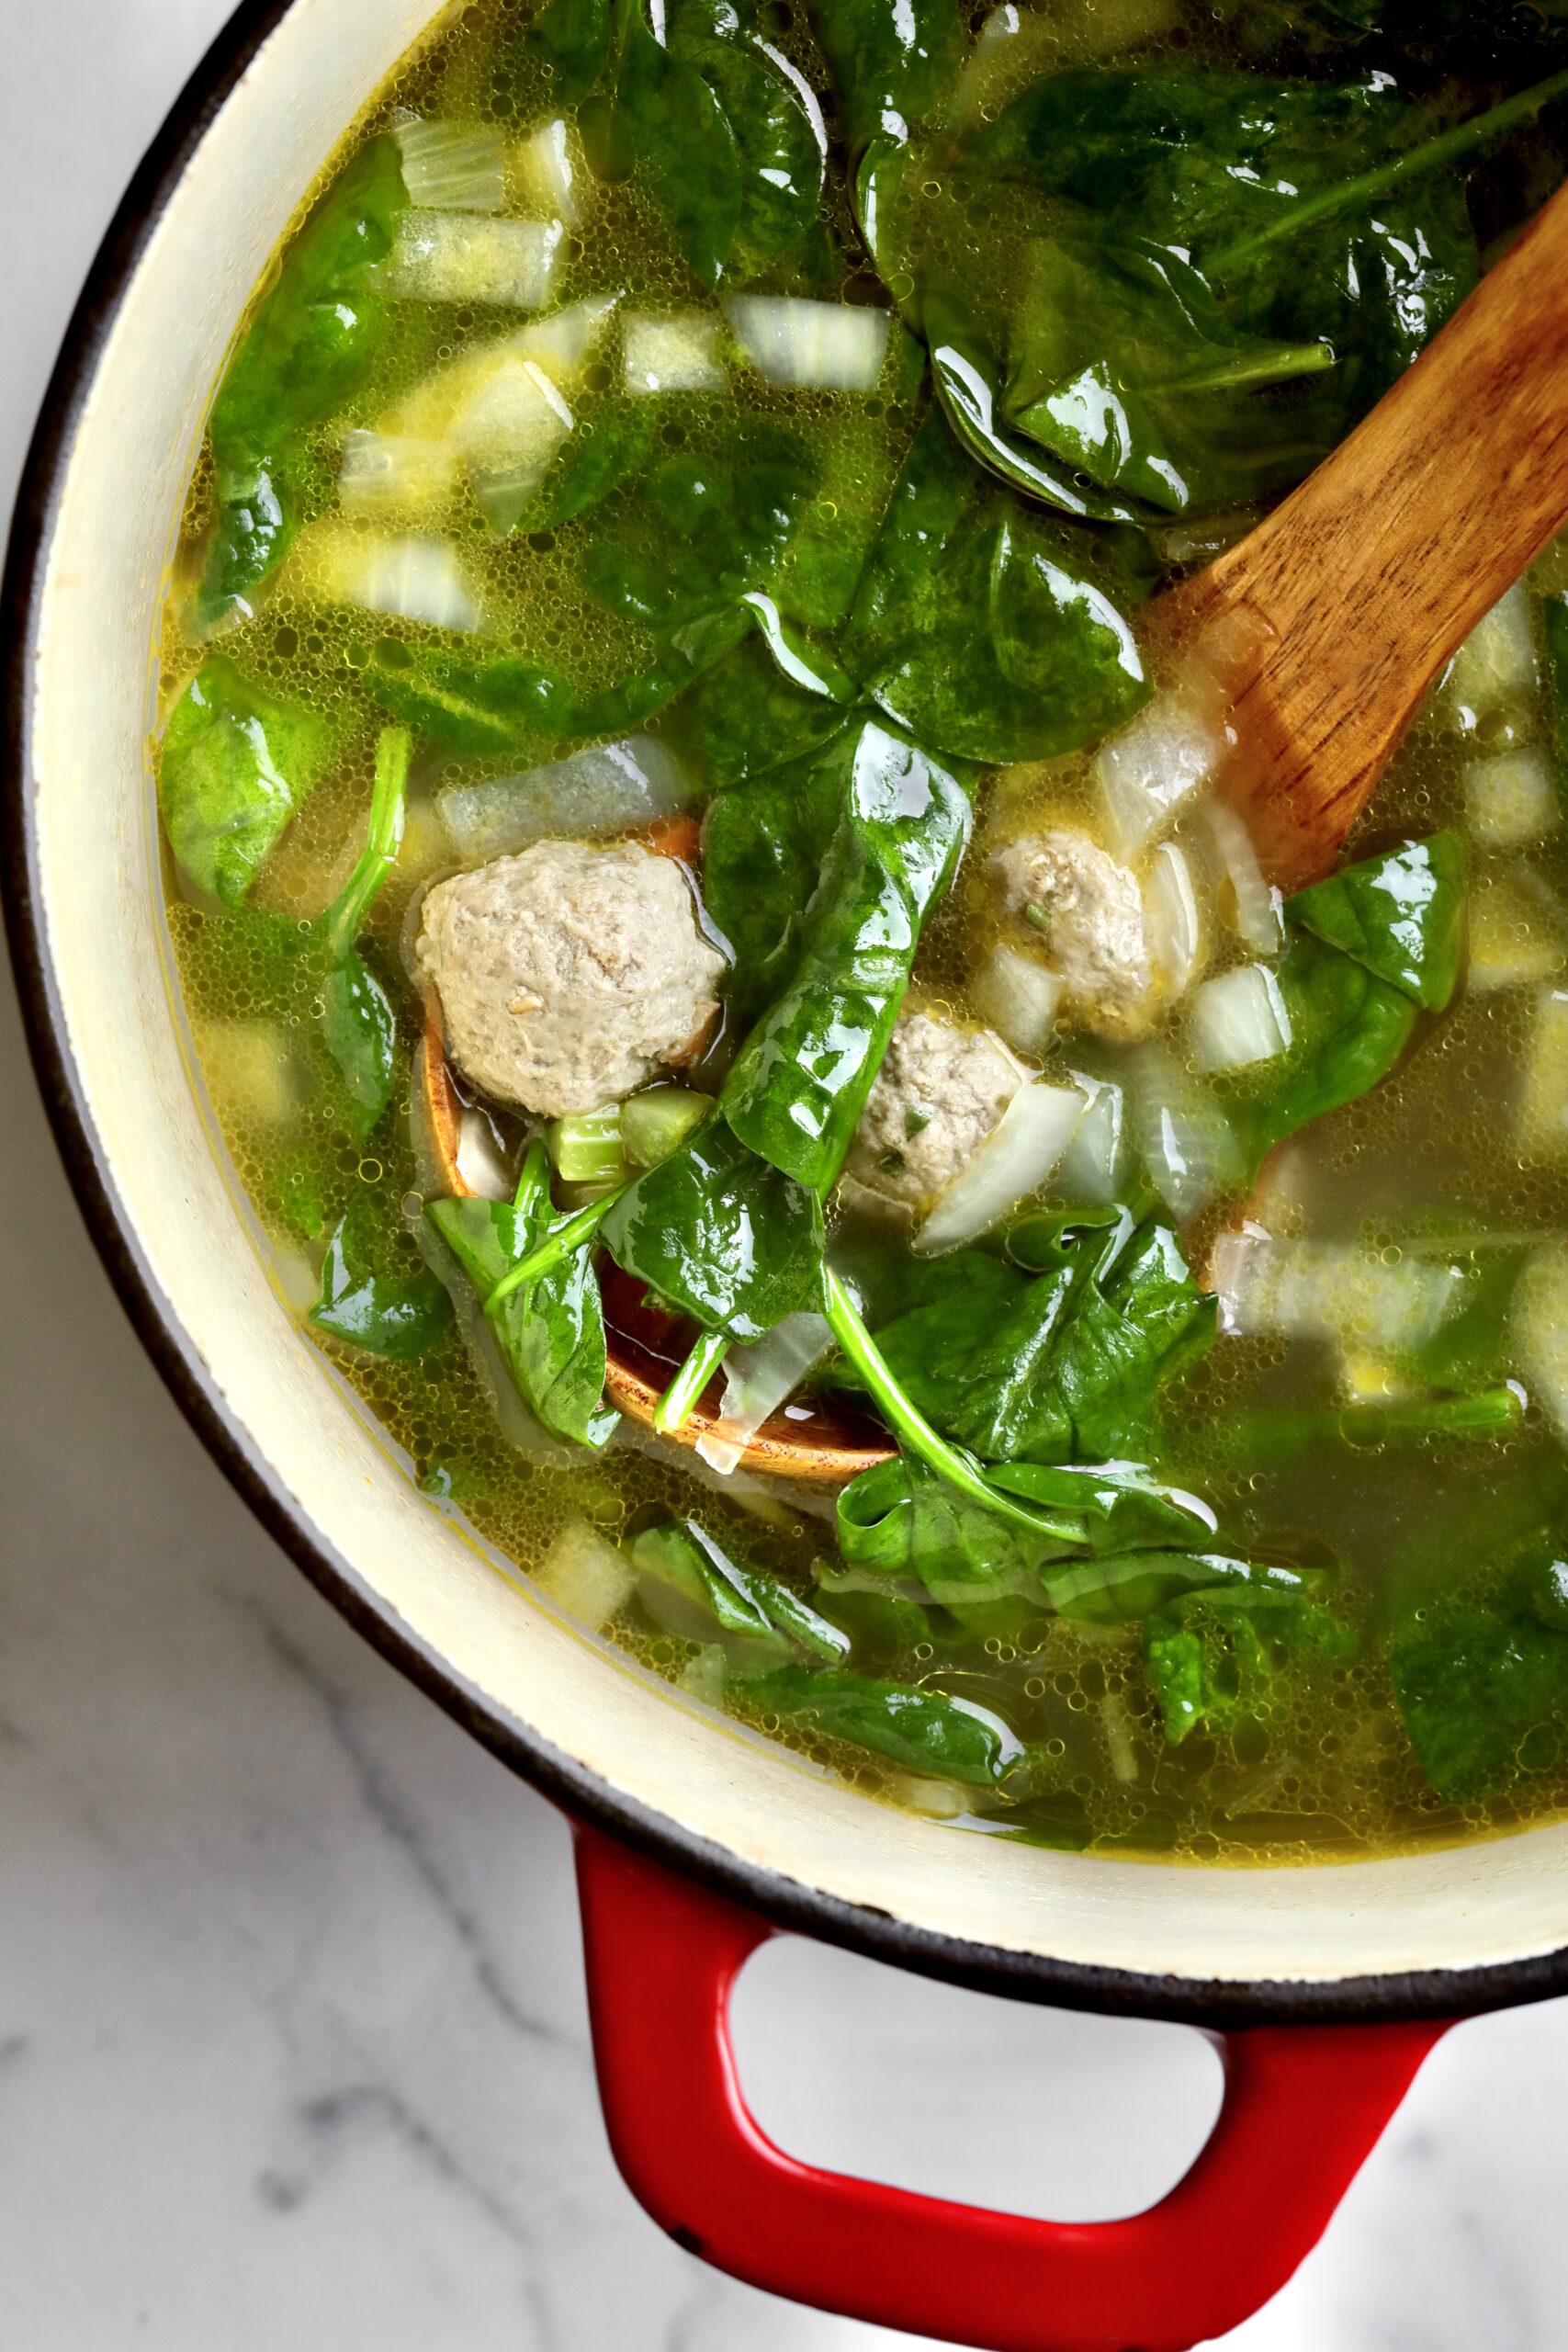 How to make Classic Italian wedding soup recipe process- cooking the spinach in the broth.